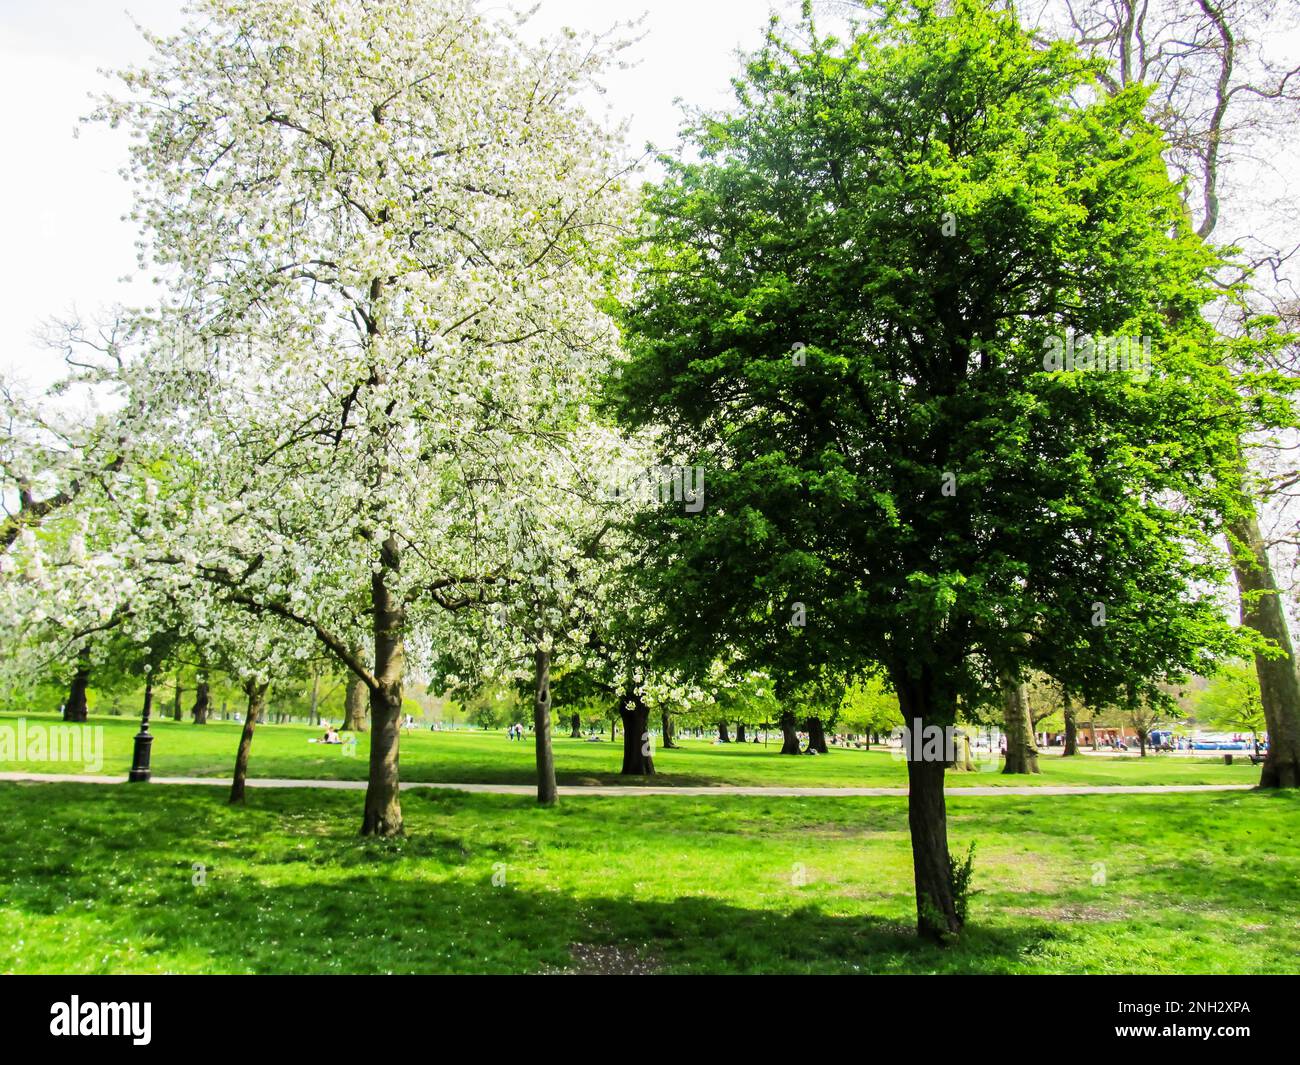 A wild cherry tree, Prunus Avium, in full bloom surrounded by different trees in a park in southern England. Stock Photo